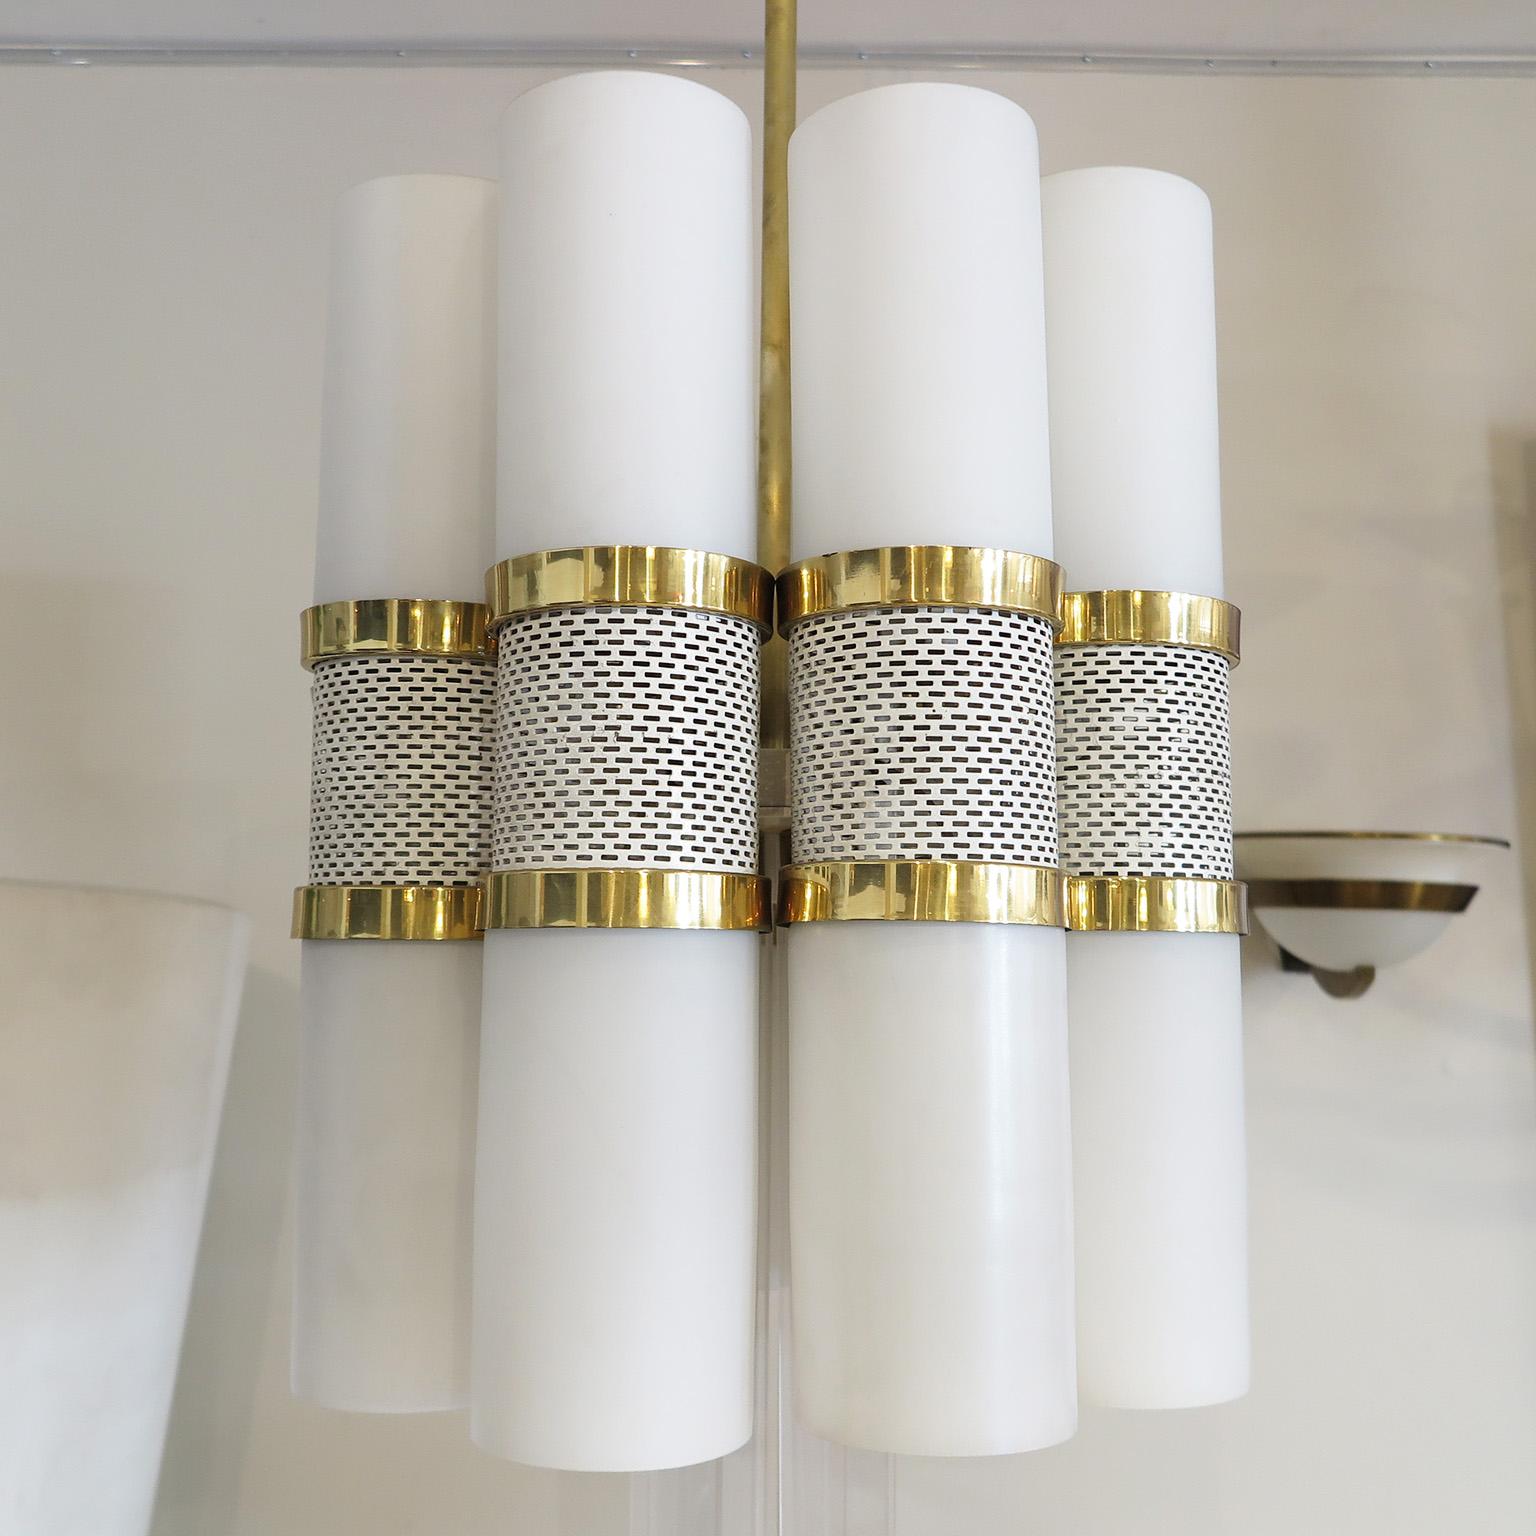 Mid-20th Century Pair of Cylindrical Chandeliers in Milk Glass and Brass, Germany c. 1960's For Sale